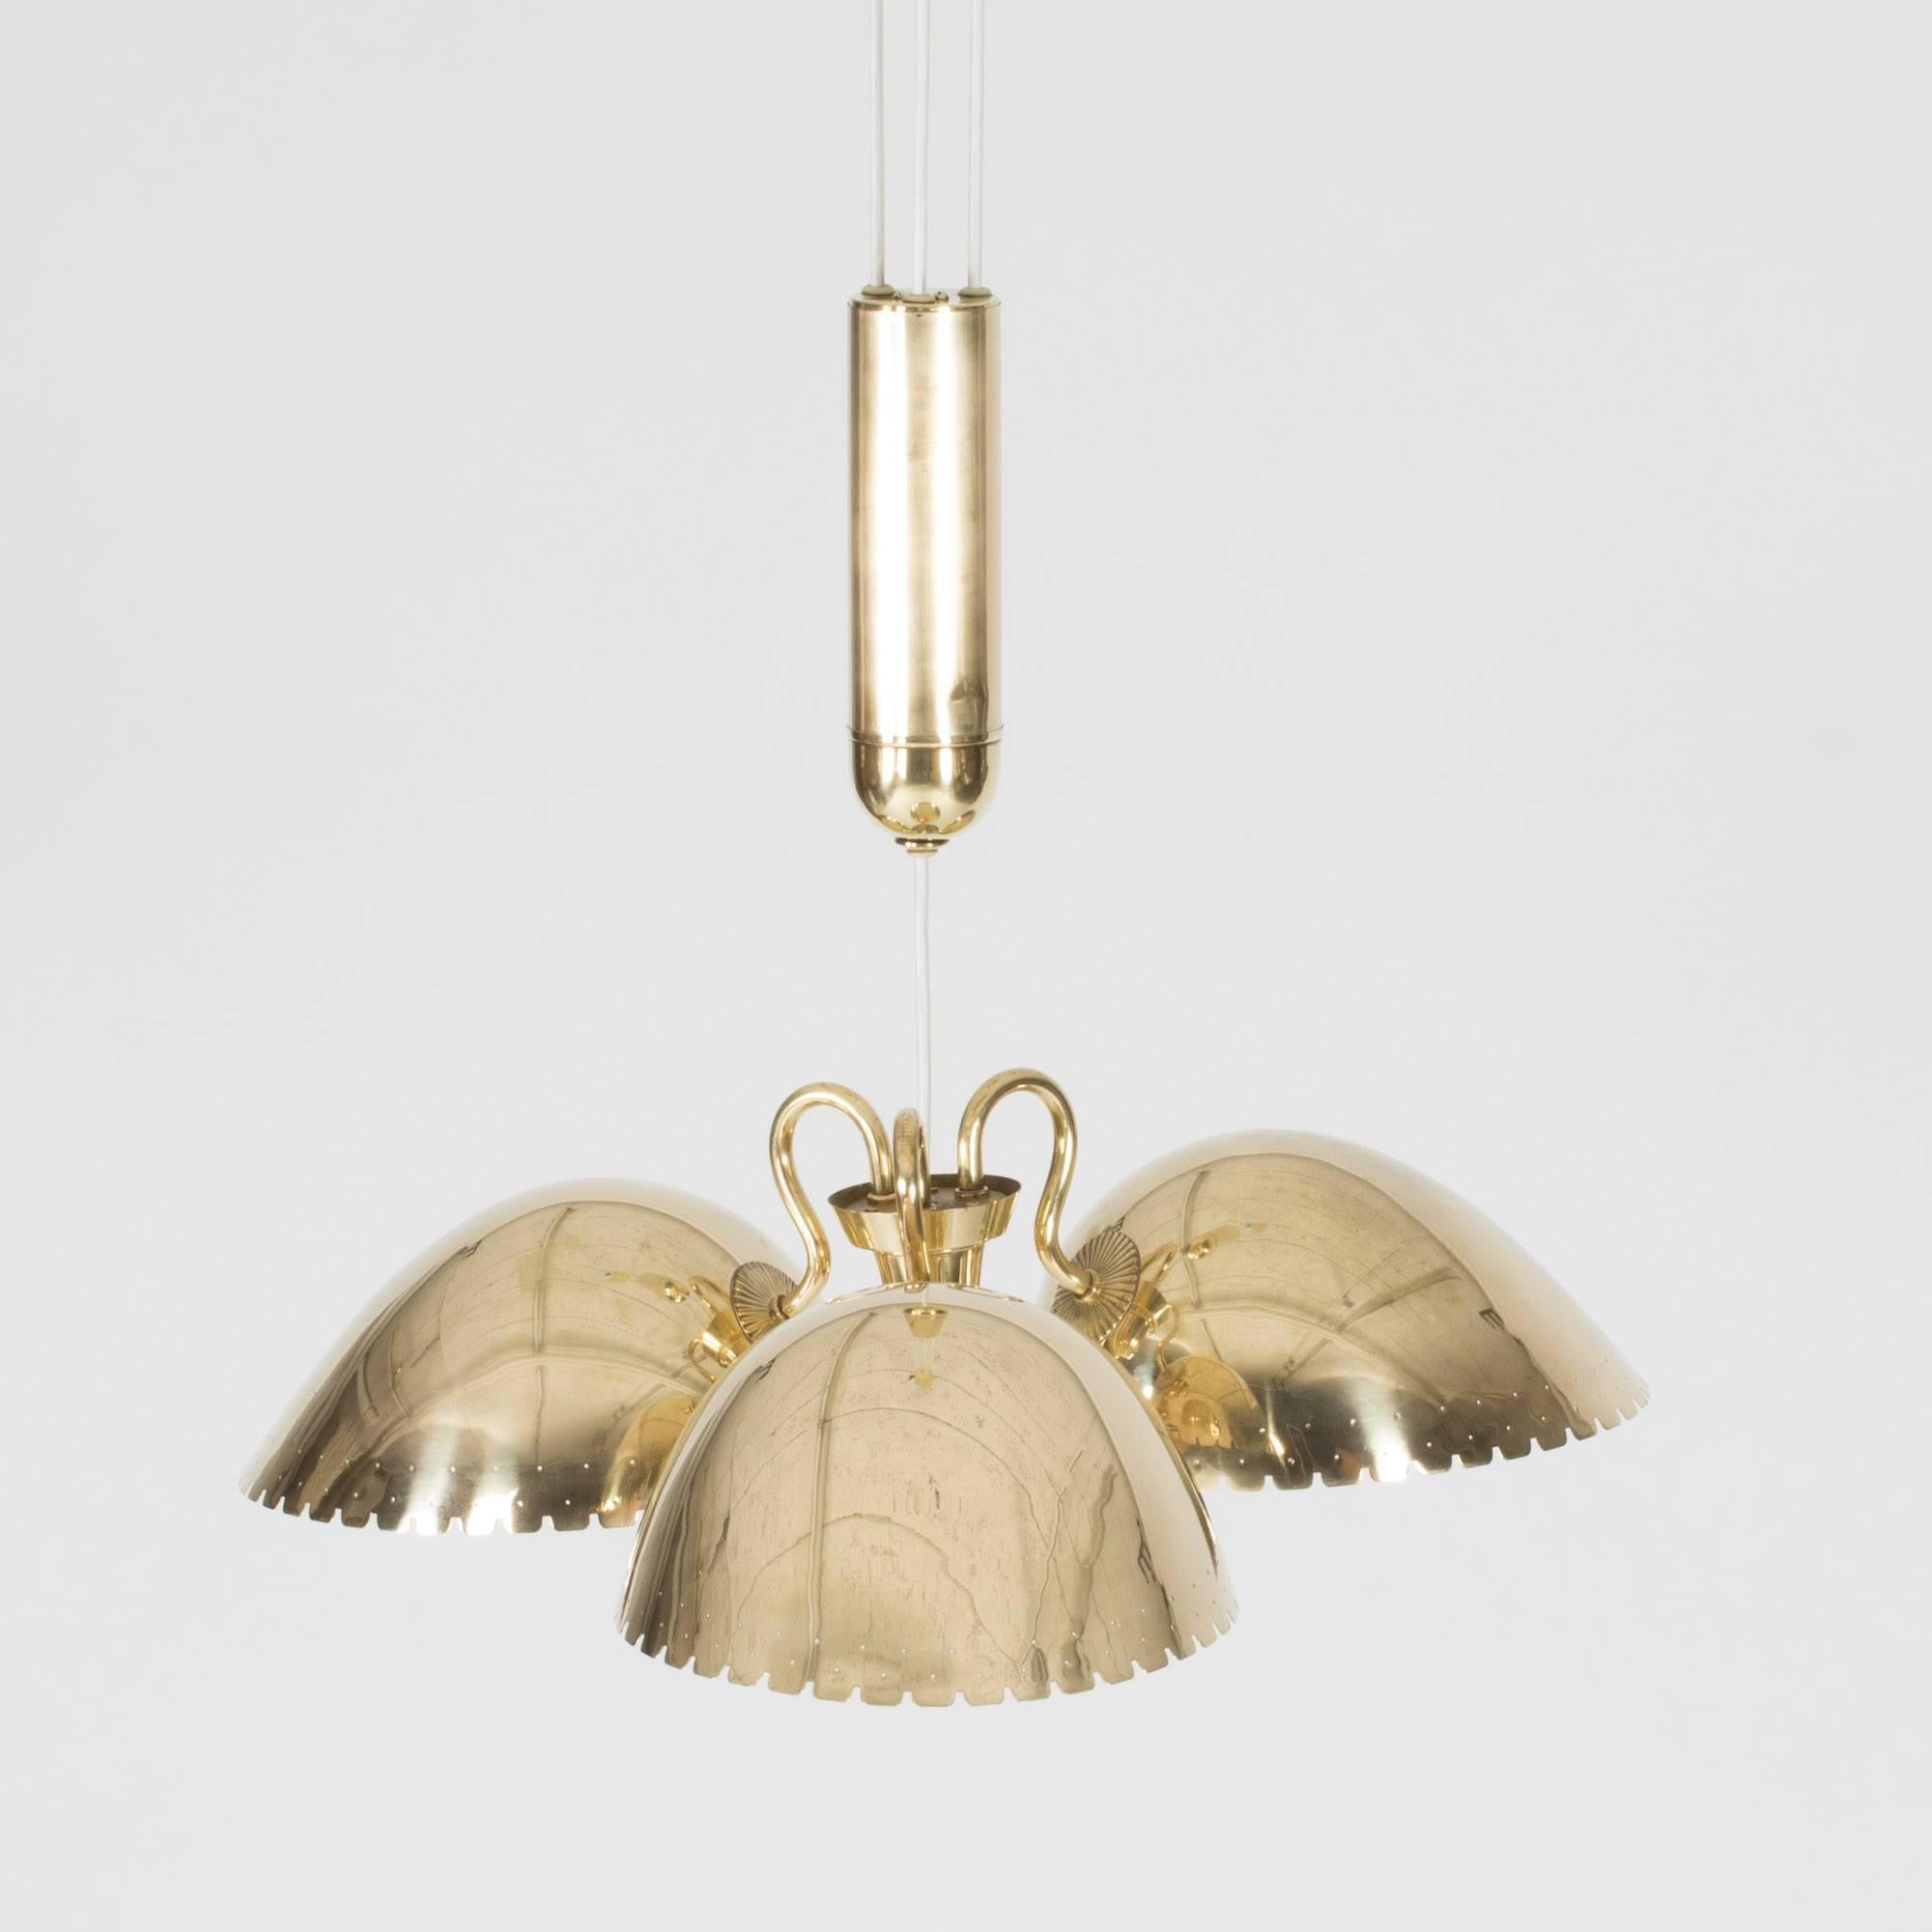 Luxurious brass ceiling lamp by Carl-Axel Acking with three large sconces and a heavy solder hiding the wiring. The sconces have square scalloped rims and are perforated around the bottom edges with small holes.

In 1939, Carl-Axel Acking